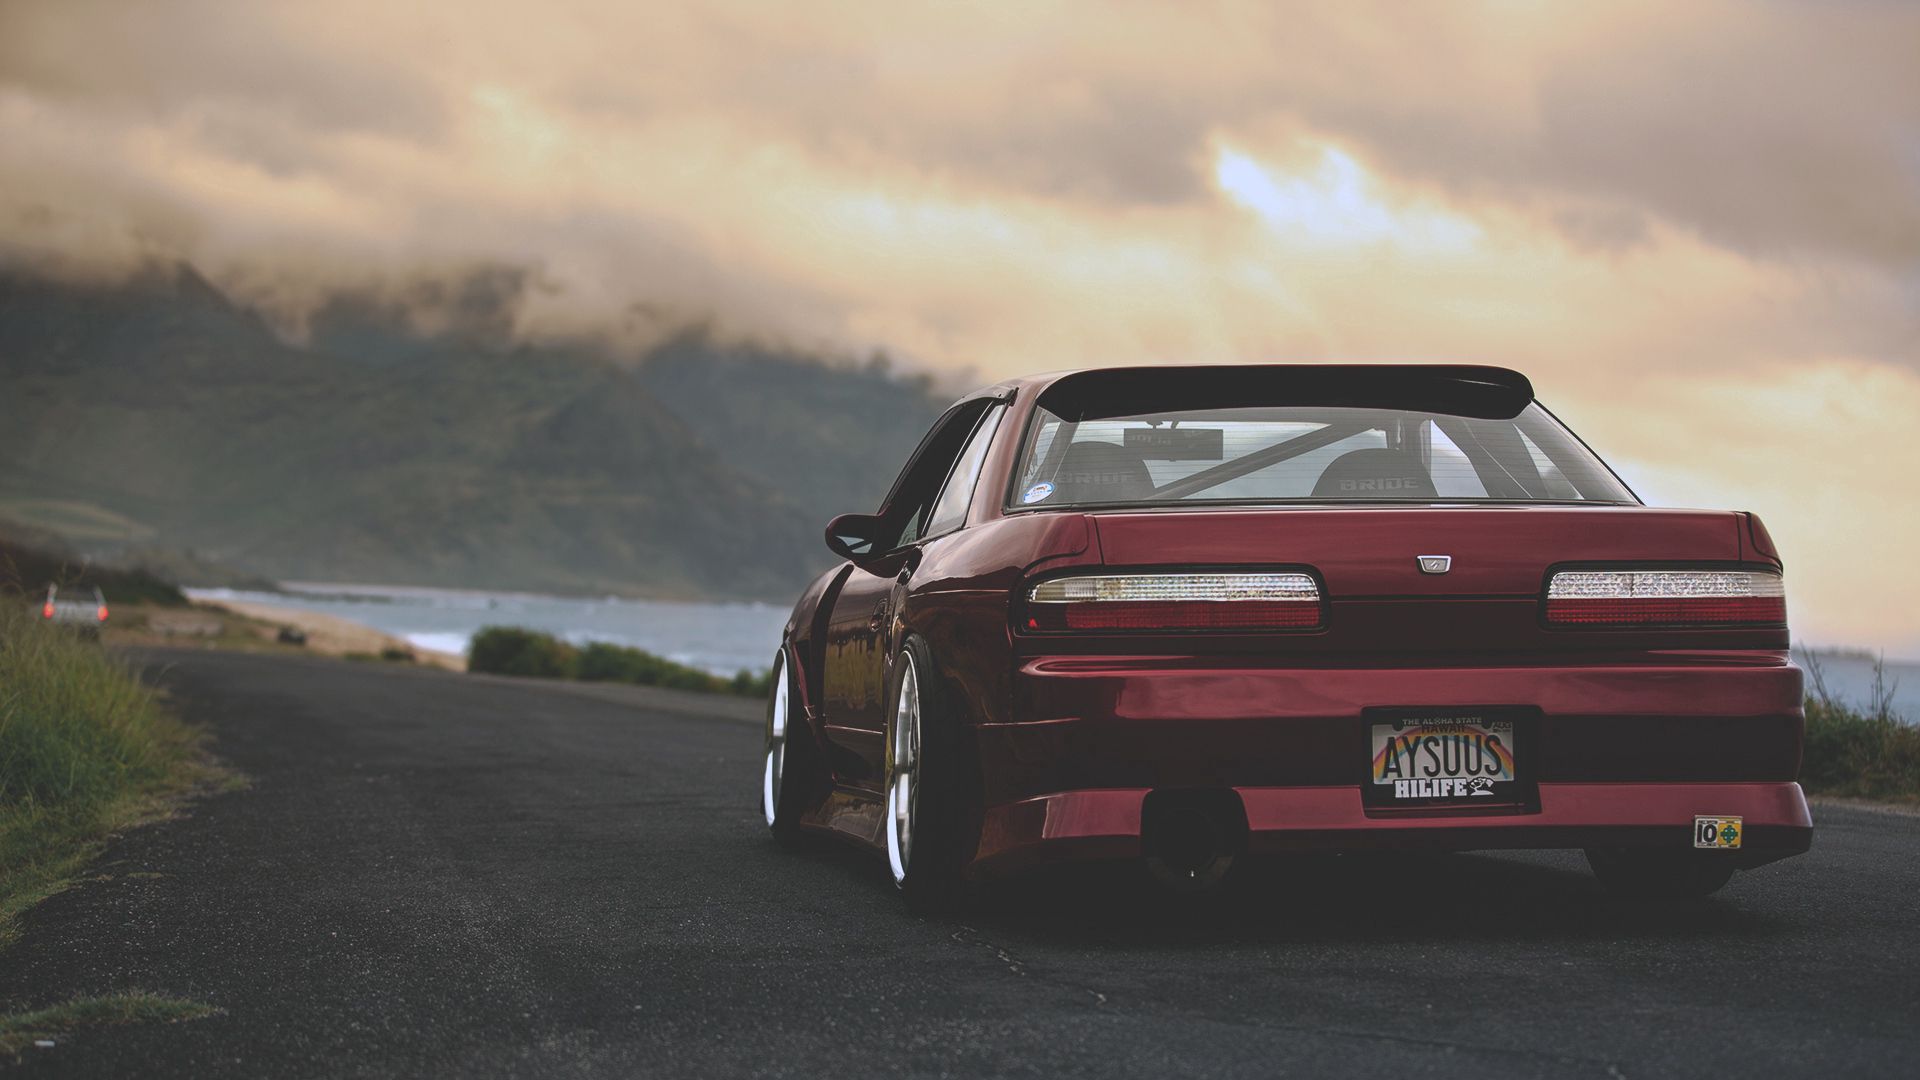 back view, nissan, cars, red, rear view, silvia